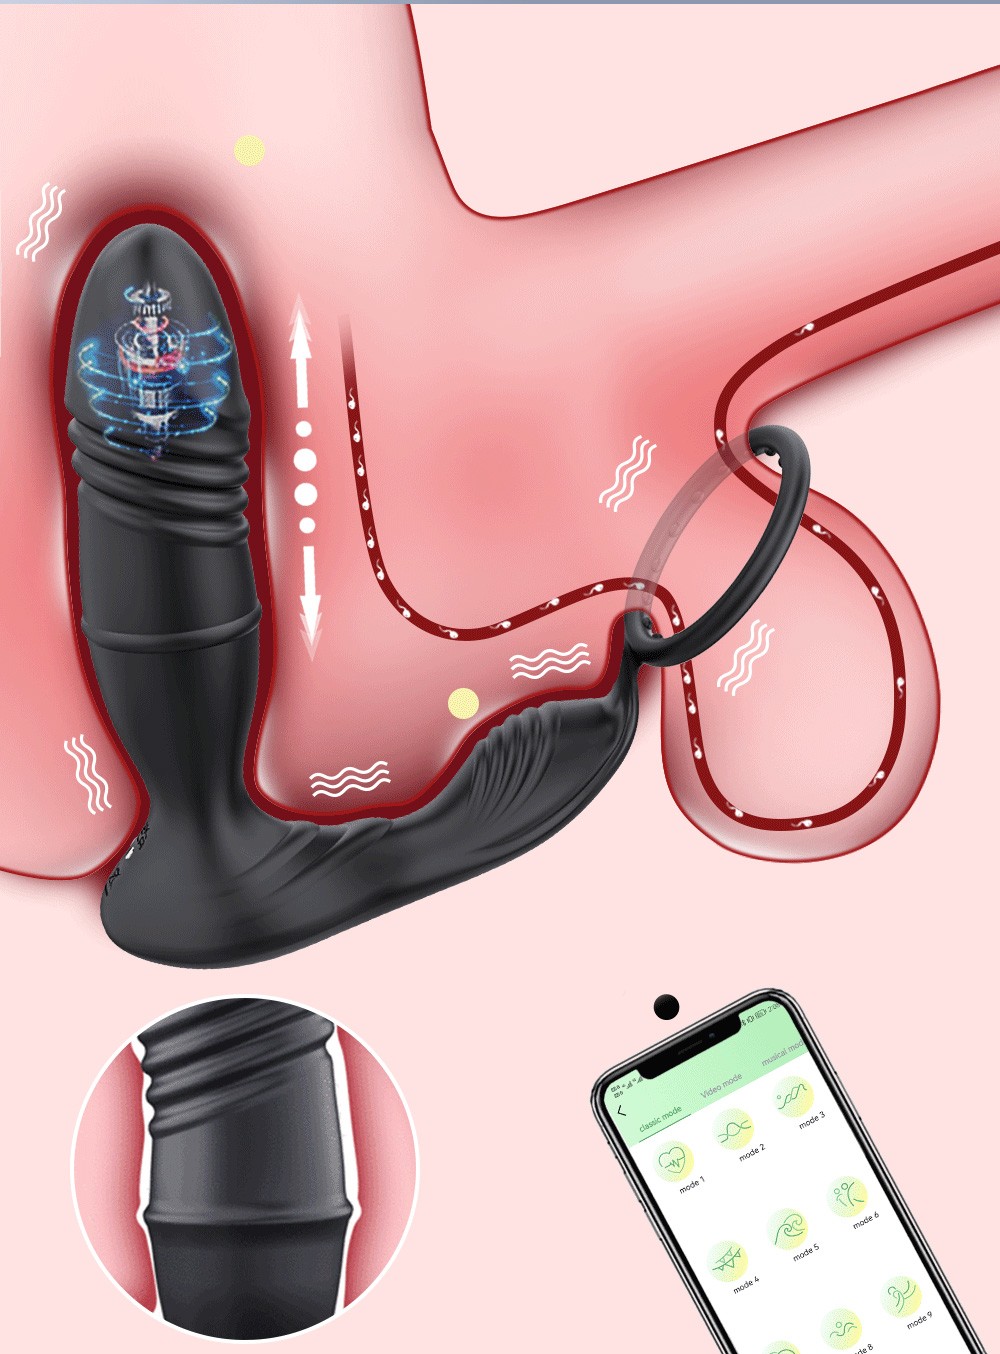 APP Controlled Thrusting Vibration Prostate Massagers s